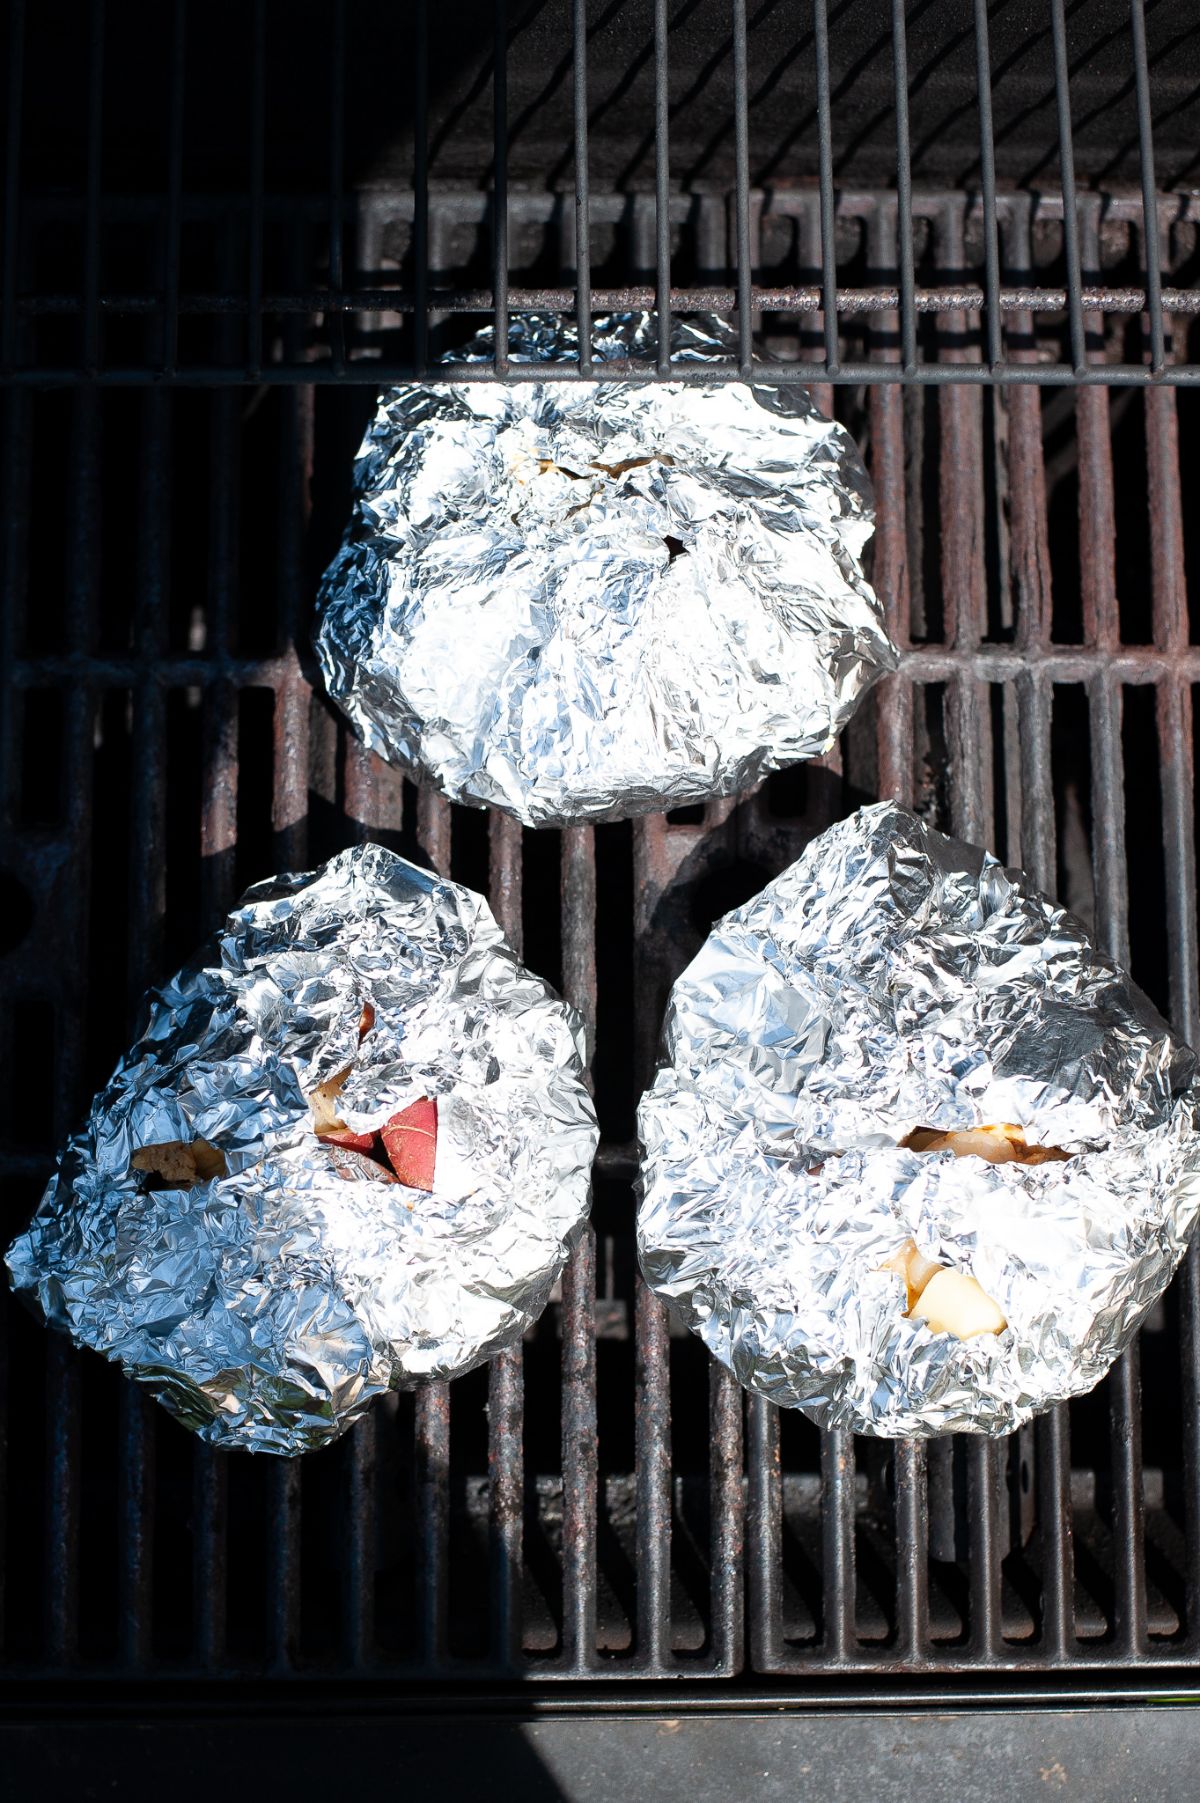 three closed Low Country Boil Foil Packets on the grill